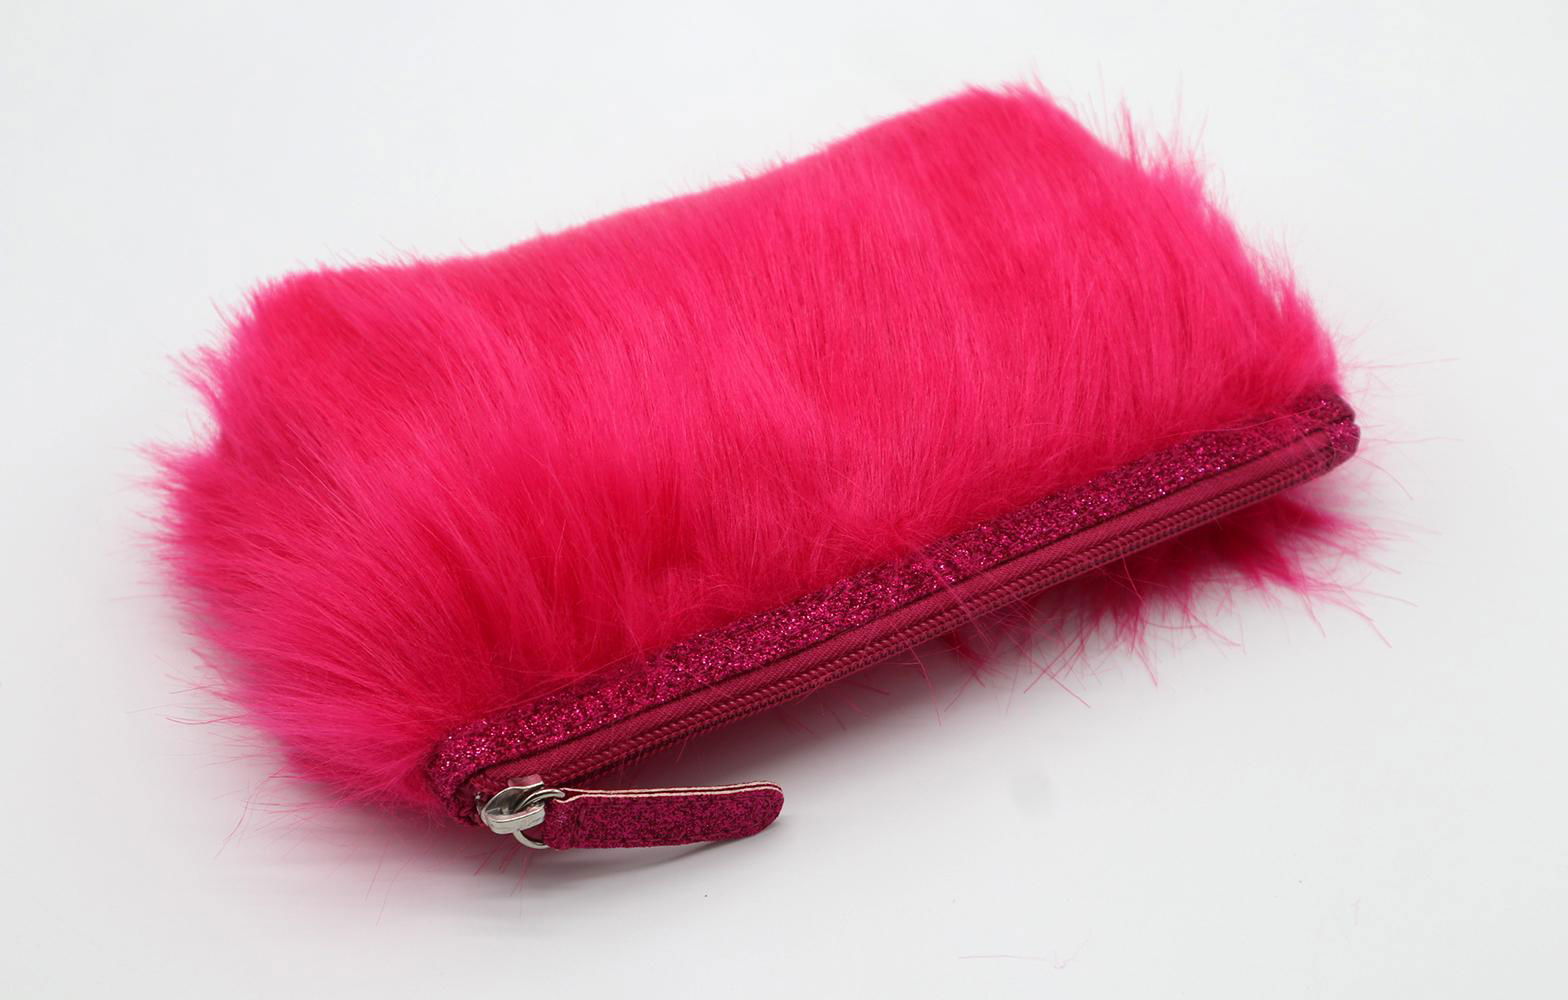 Fake fur cute lady makeup bag pink color with glitter band at top 4